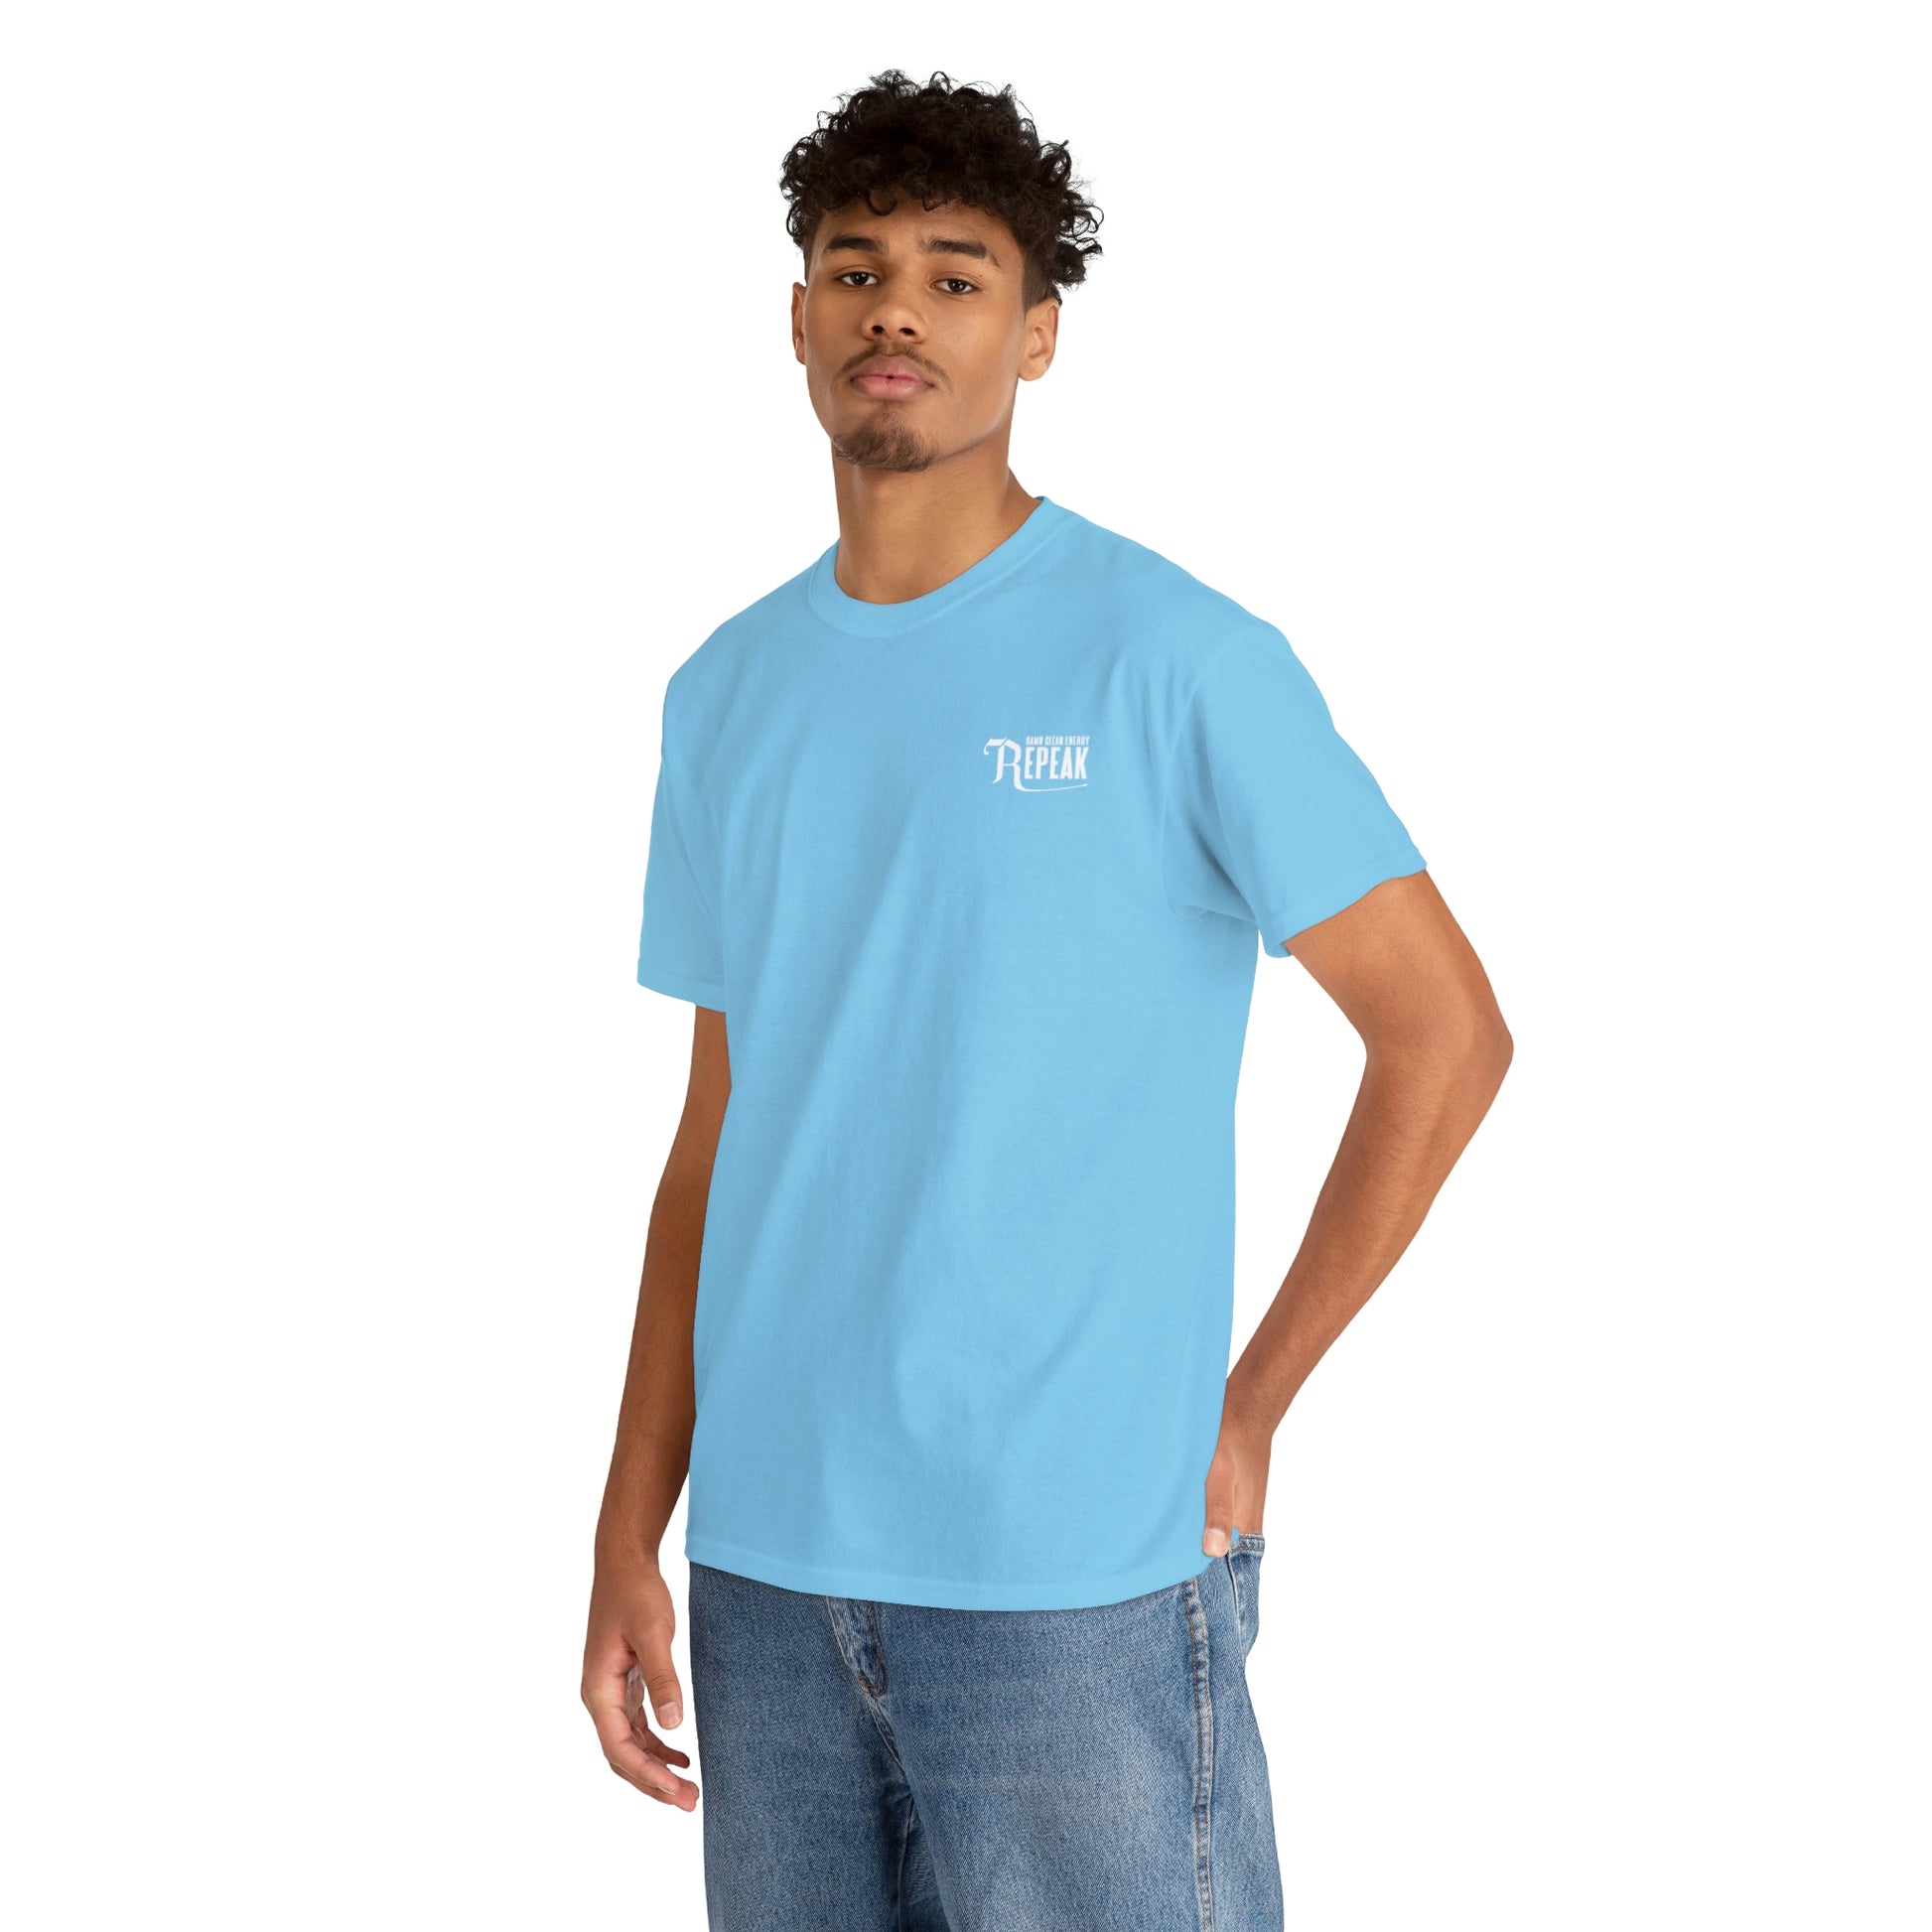 repeak energy drink blue t-shirt, front side with male model